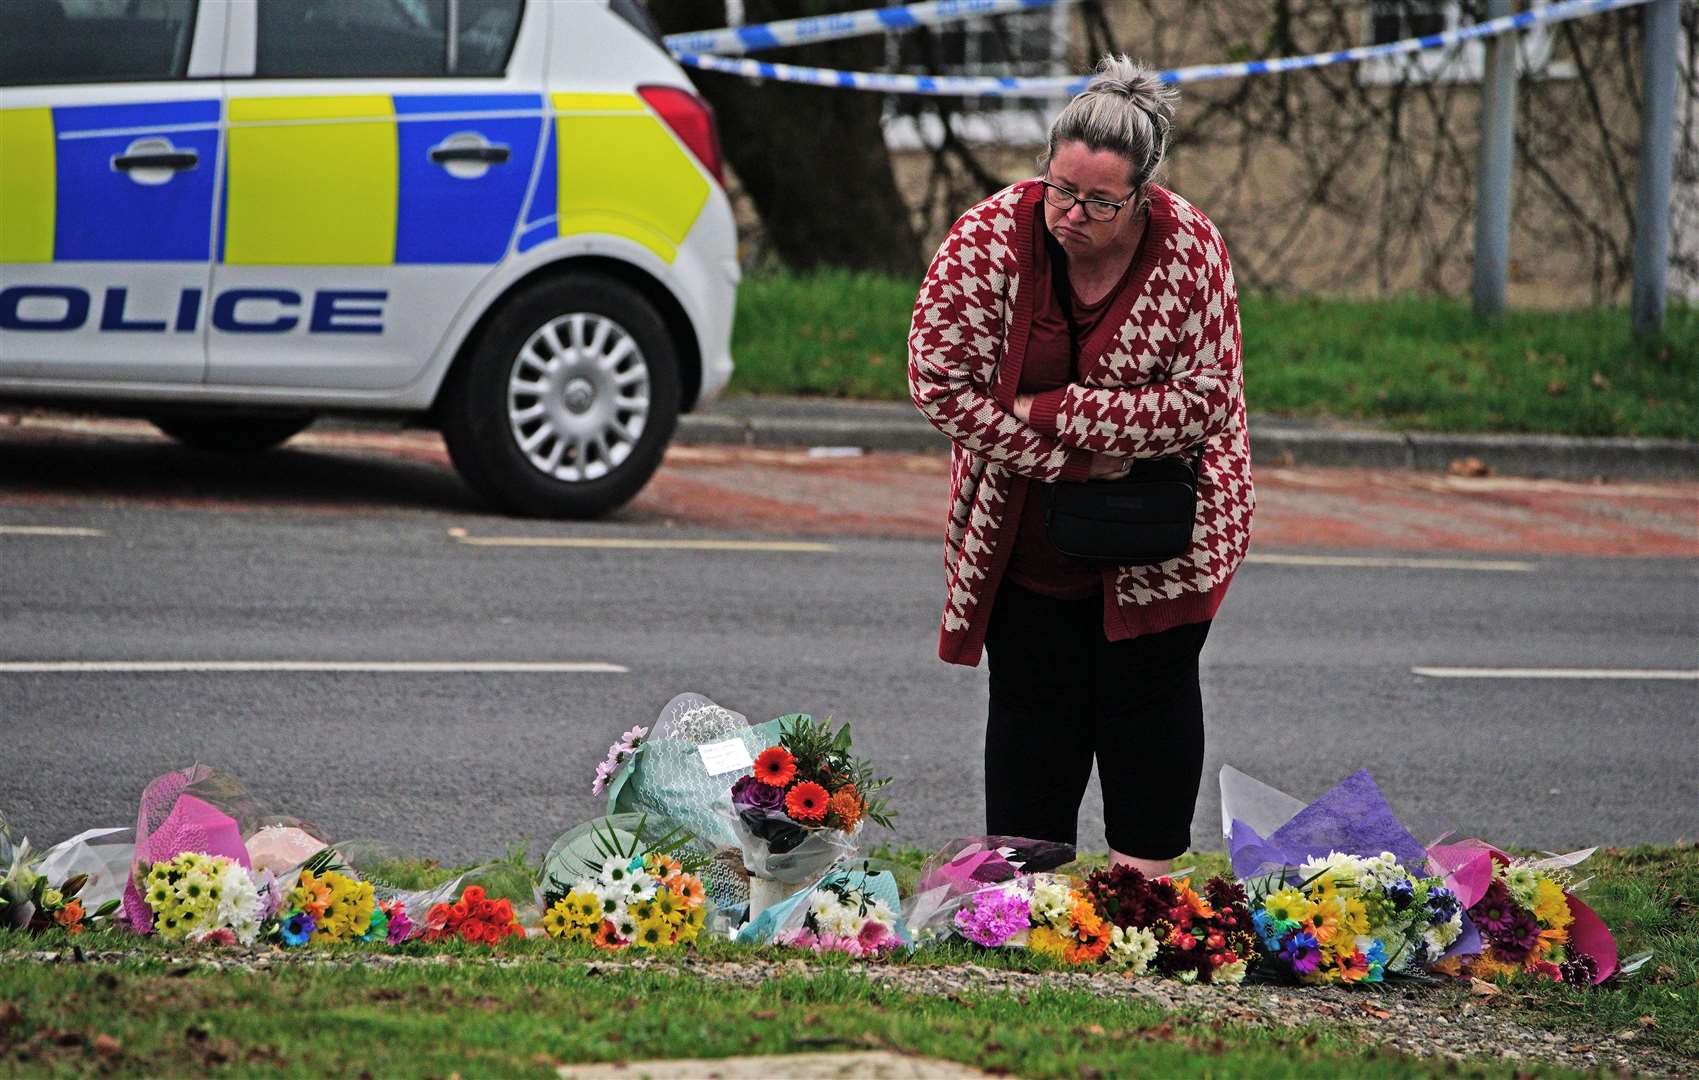 A woman lays flowers on Sheepstor Road in Plymouth after a woman’s body was found (Ben Birchall/PA)